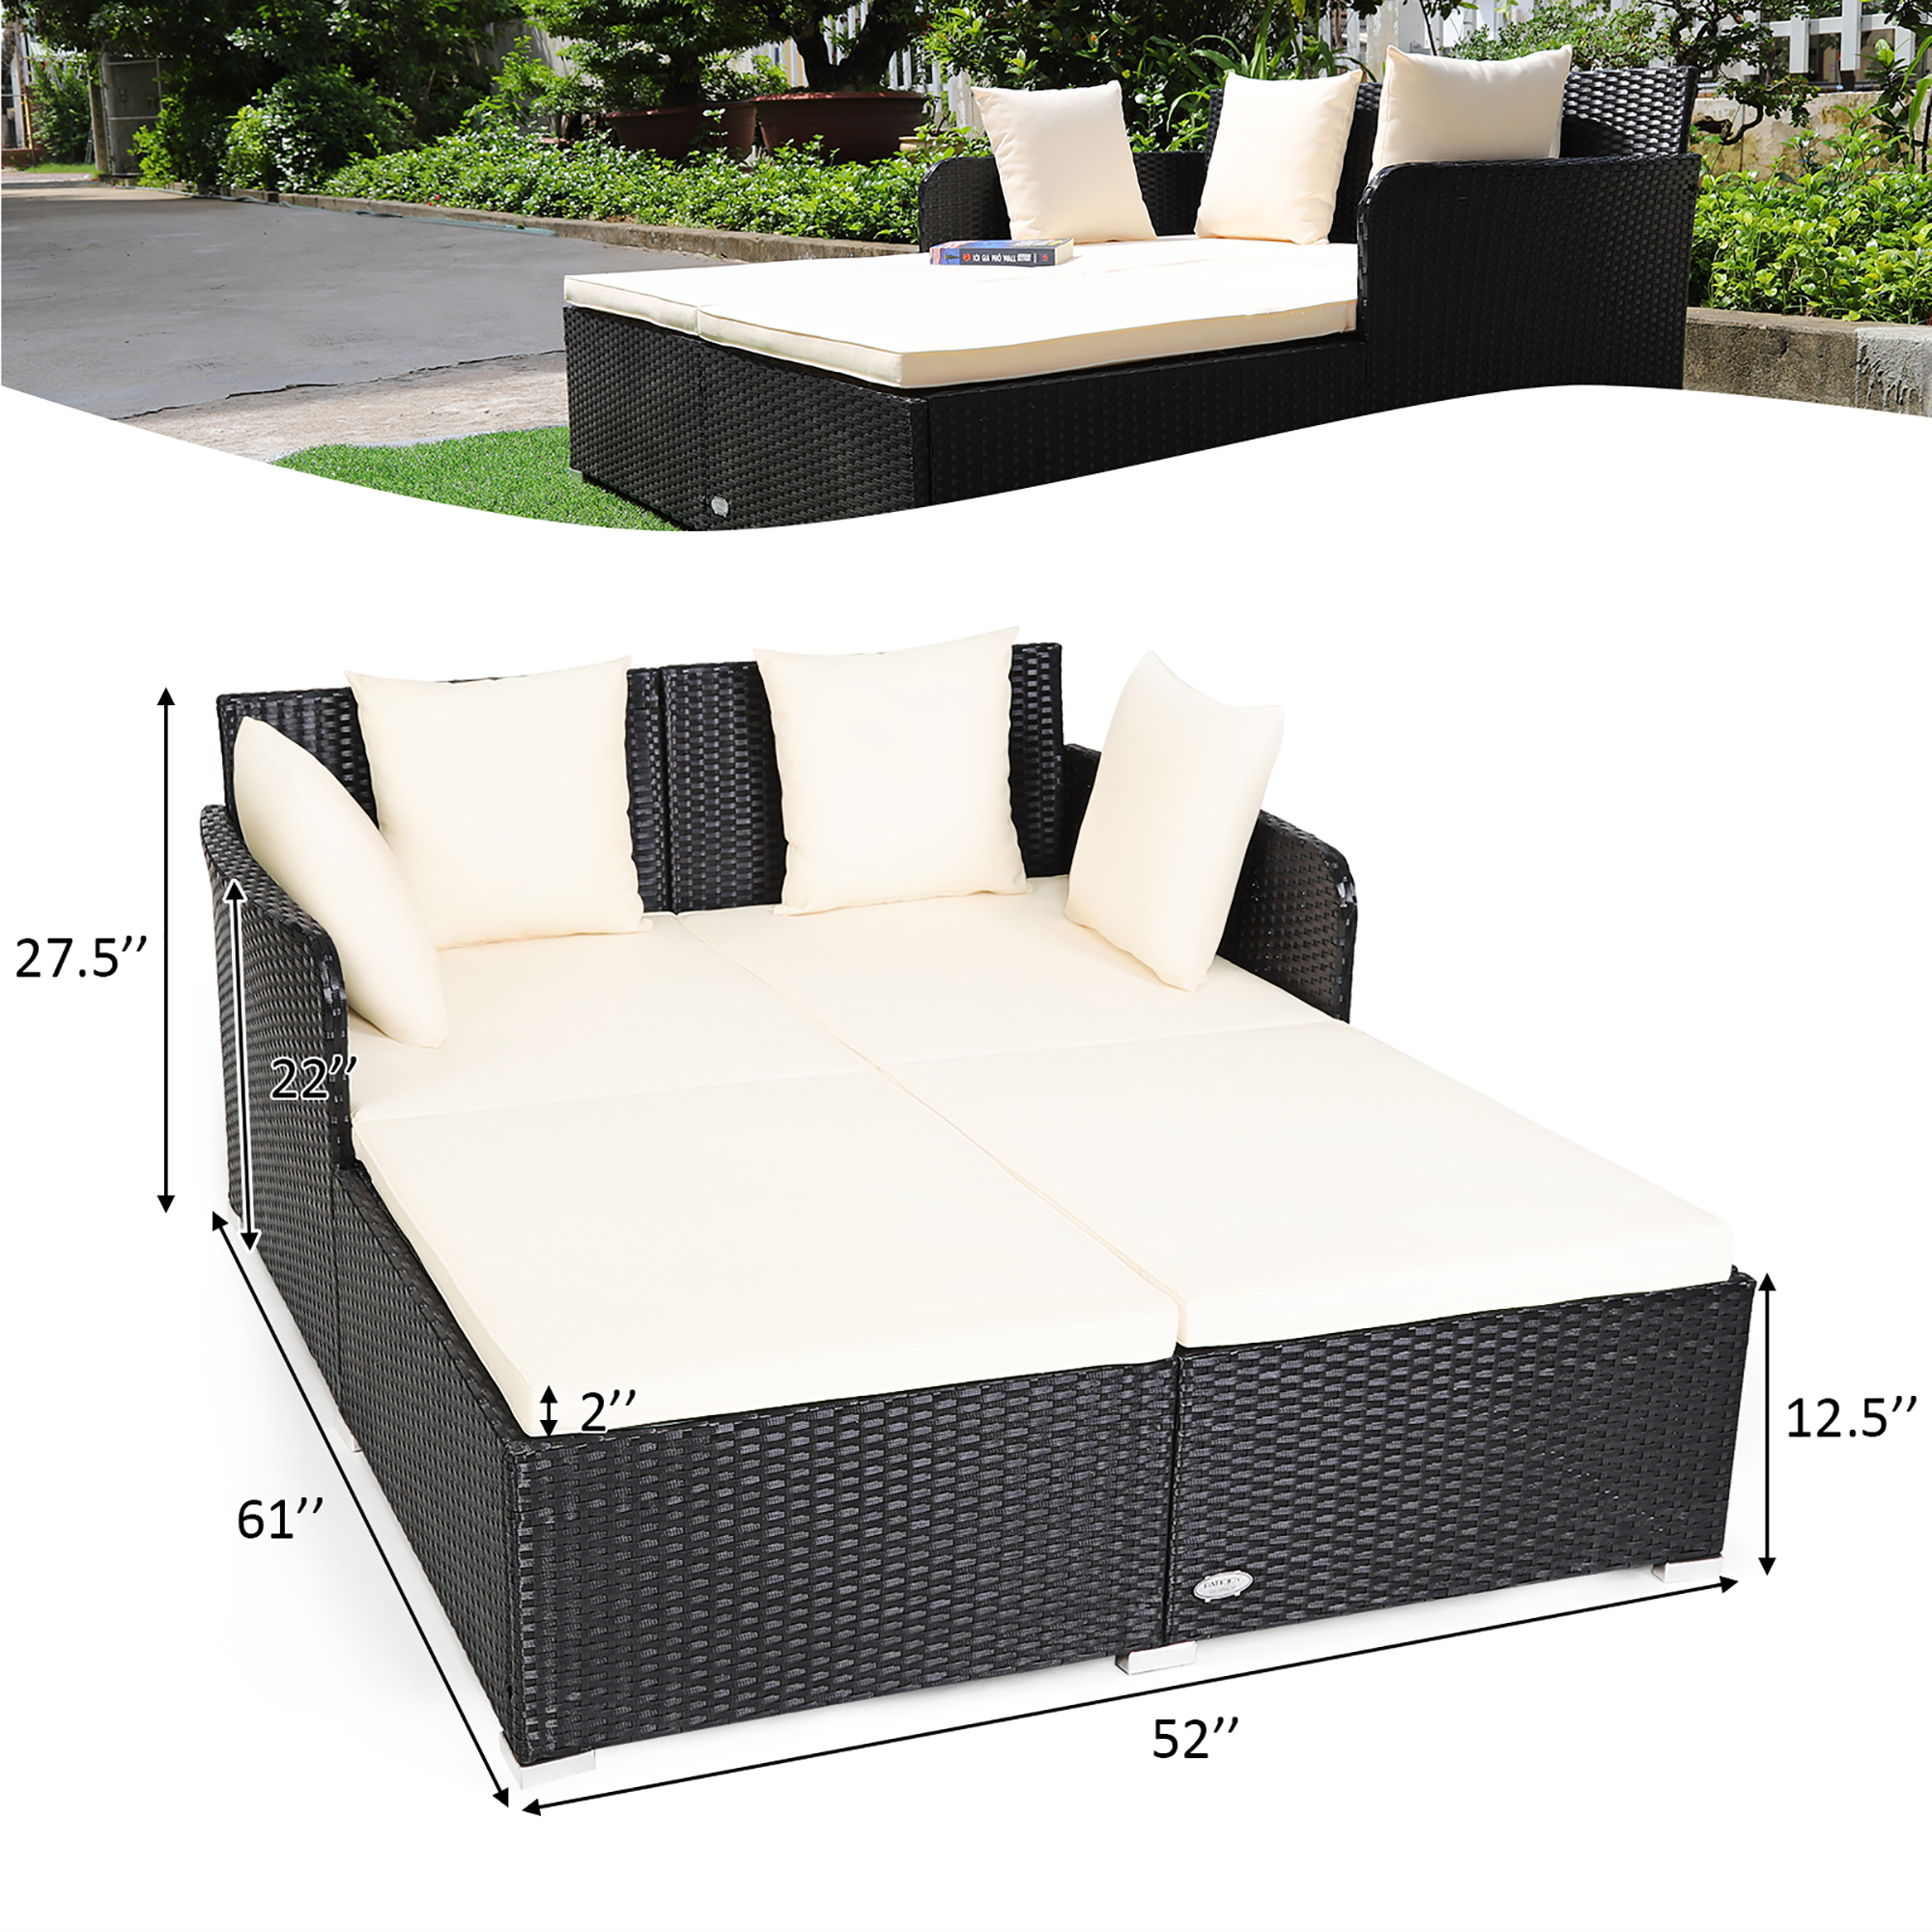 Costway Outdoor Patio Rattan Daybed Pillows Cushioned Sofa Furniture Beige - image 3 of 10